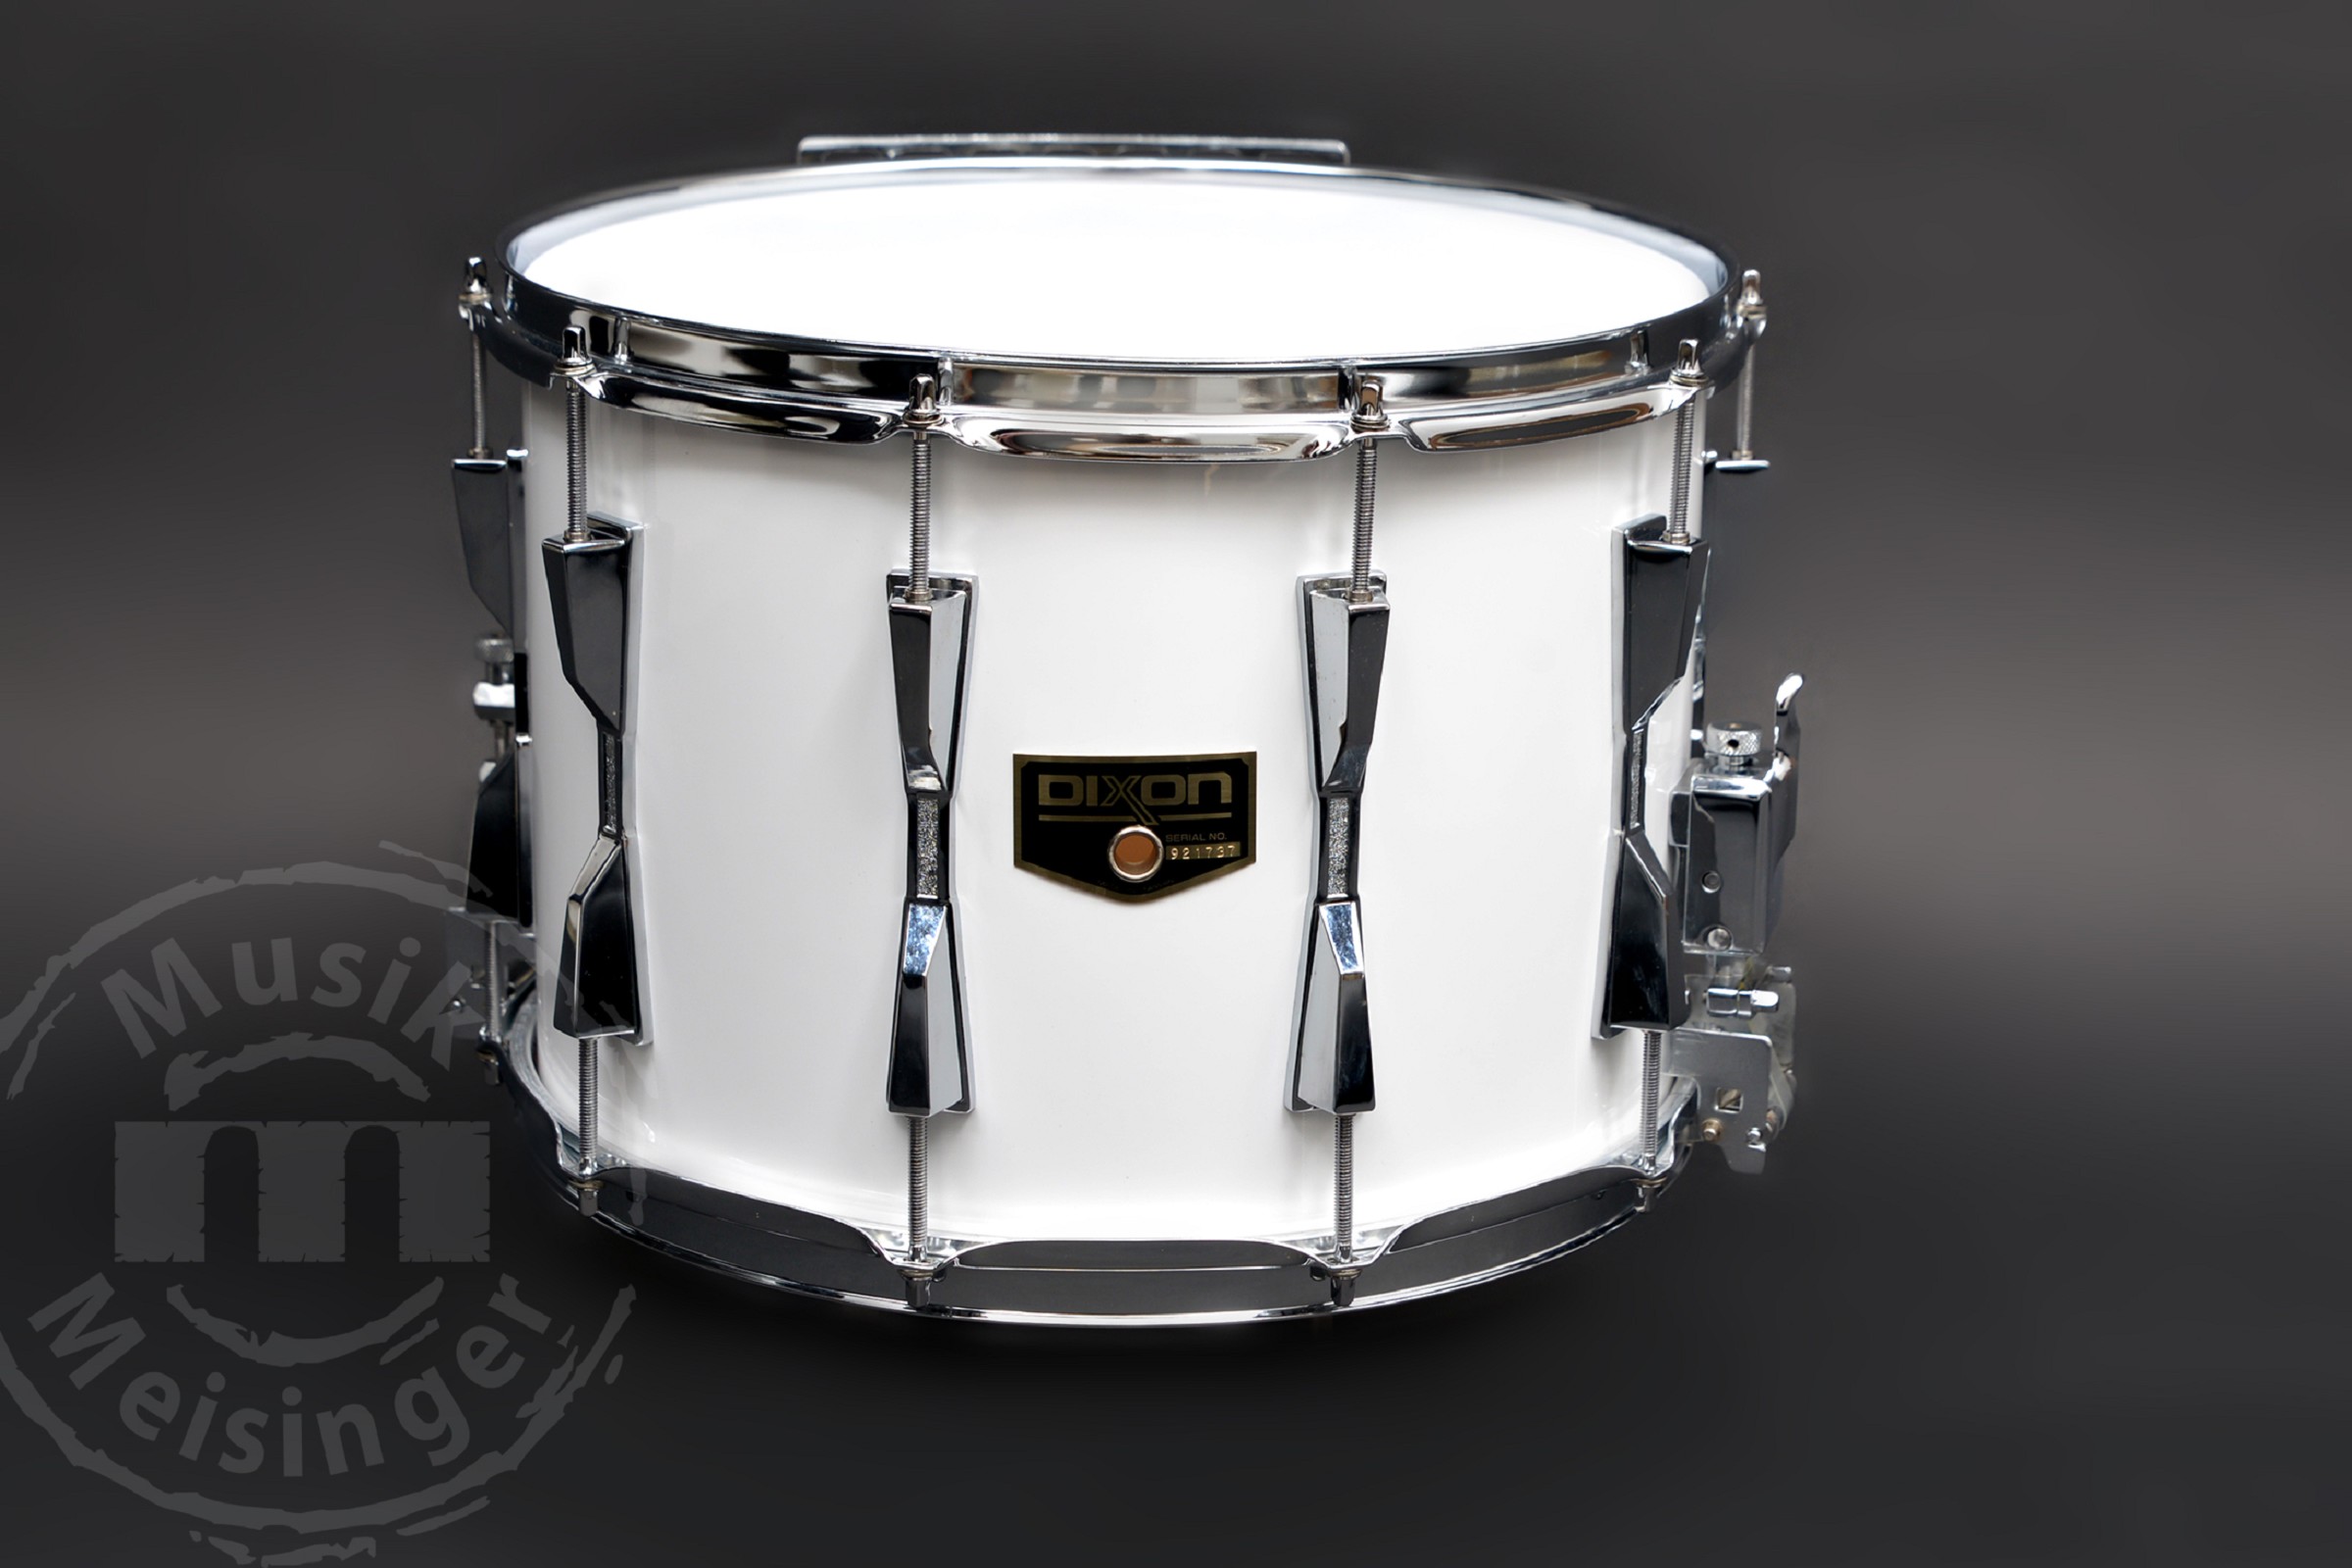 Dixon PMS-1866 14x10 Marching Snare